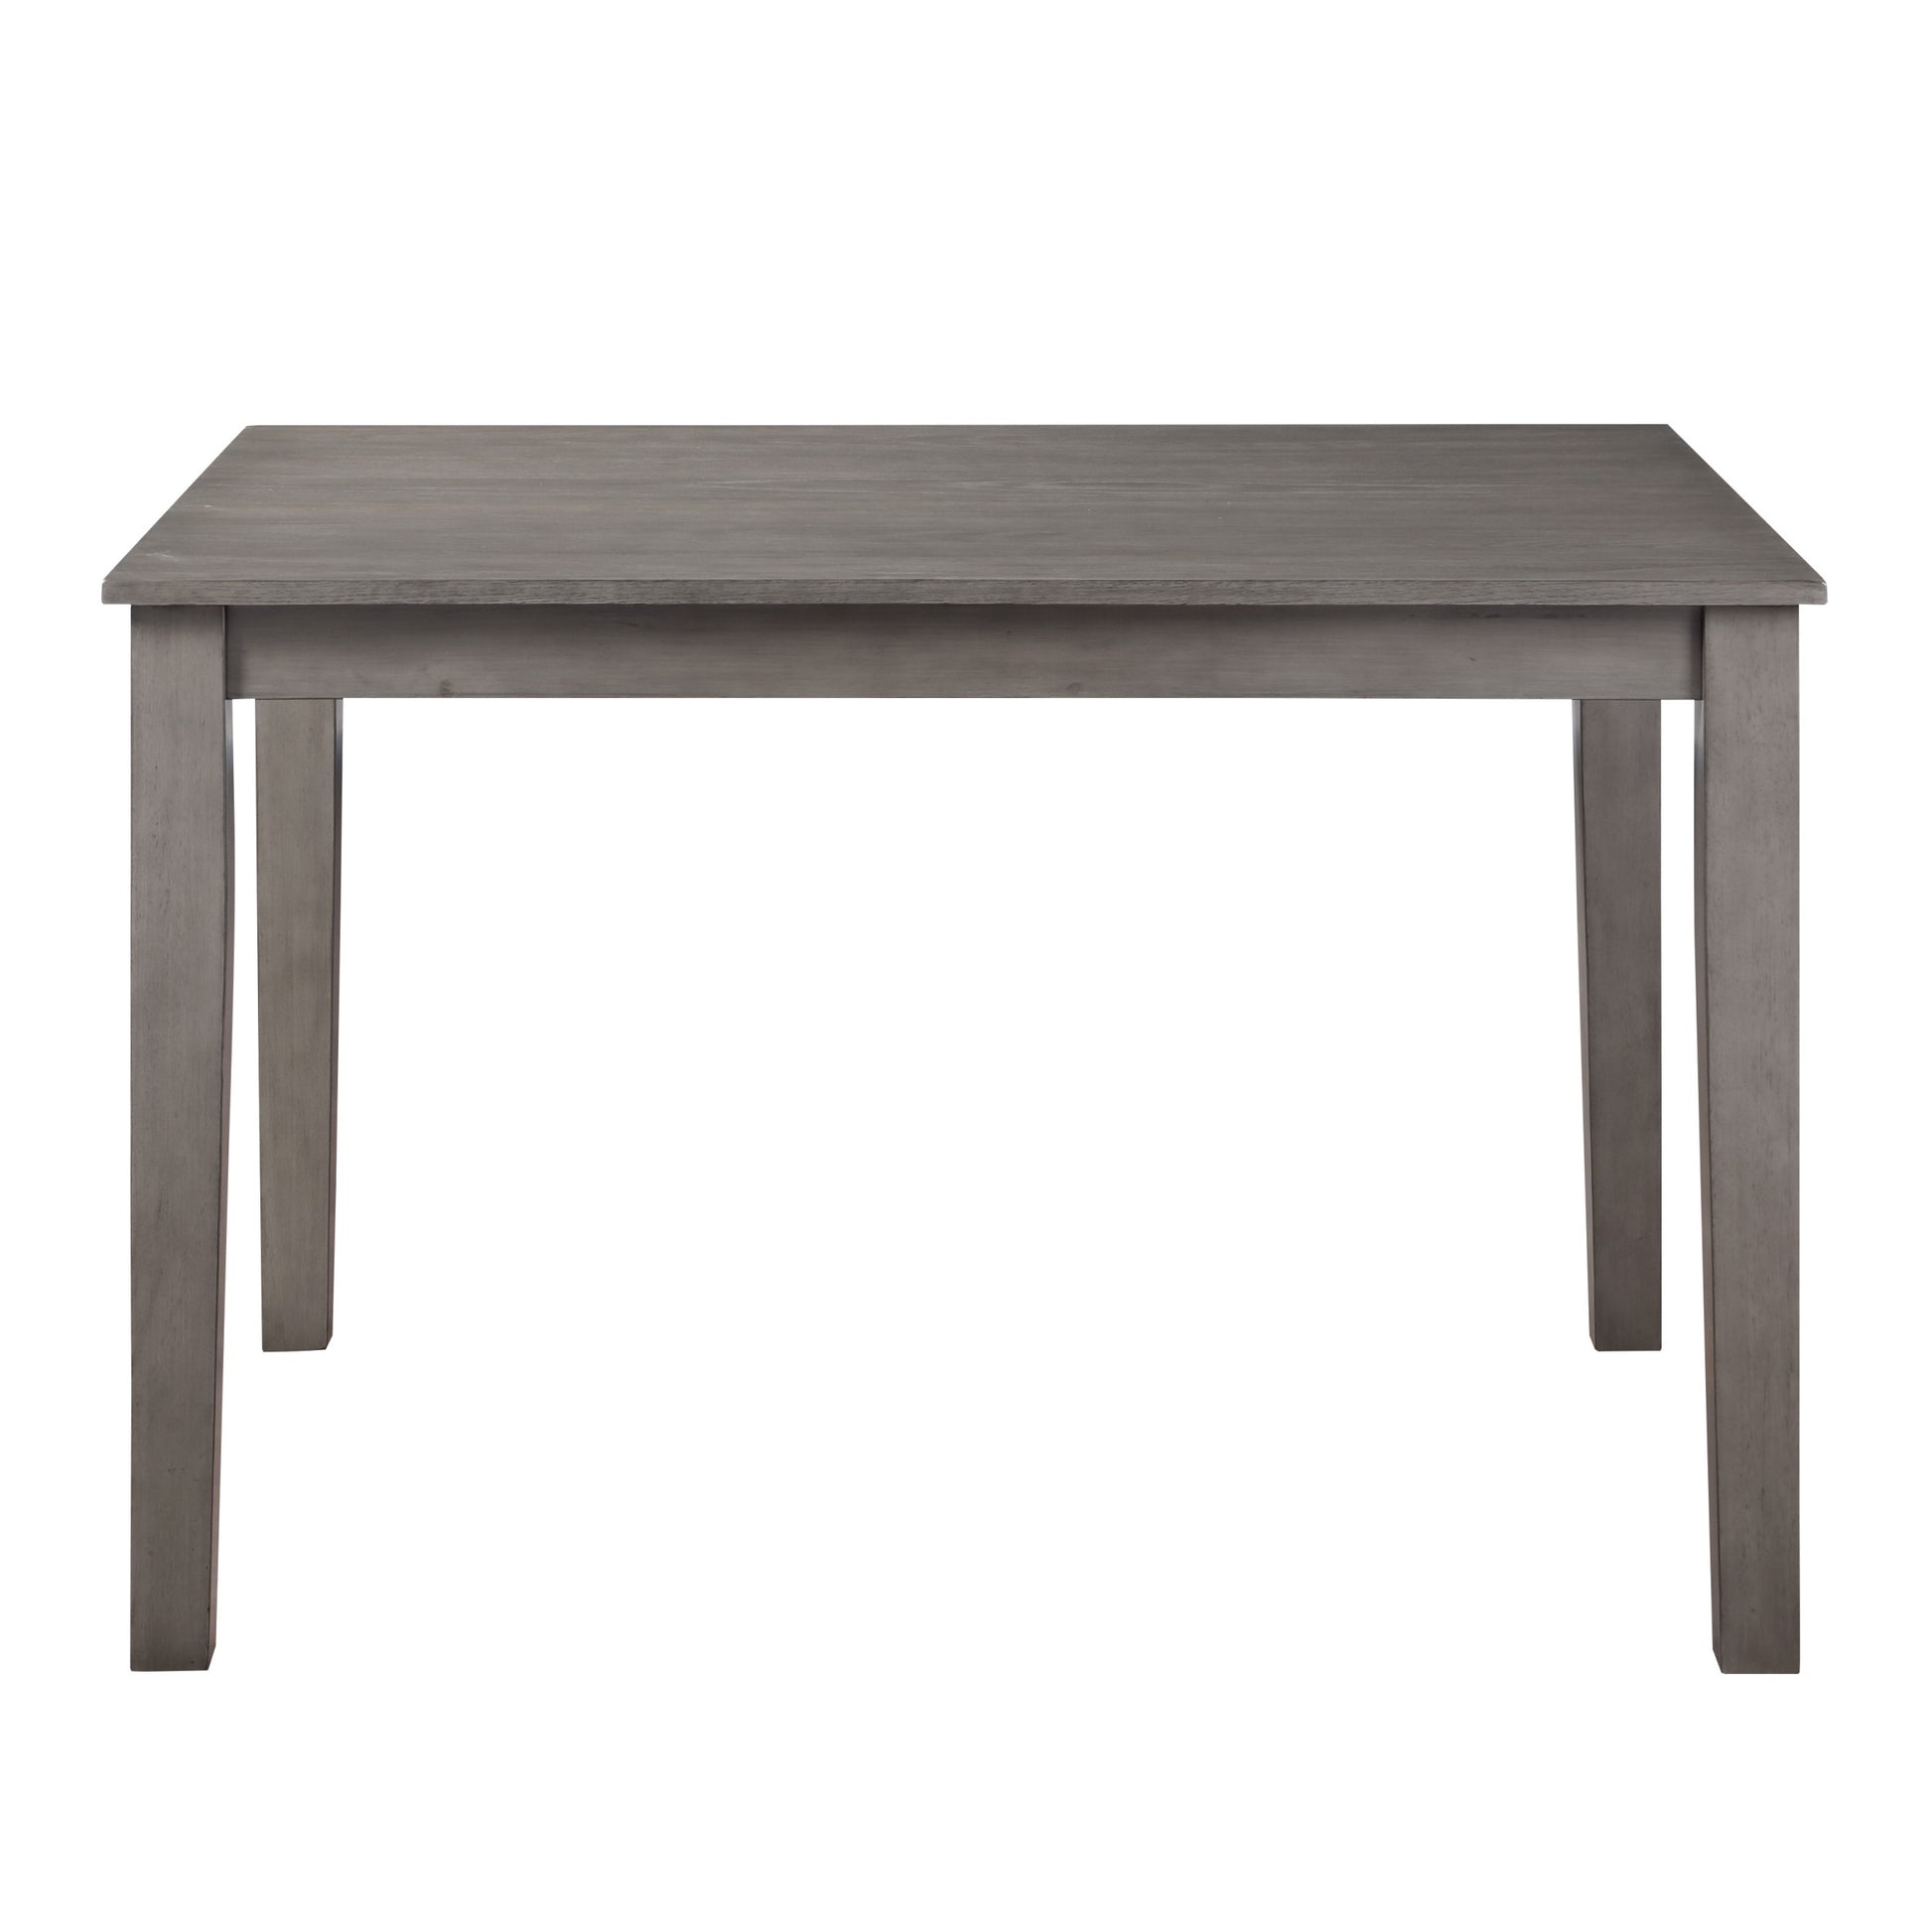 Beautiful Gray Finish 5pc Dining Set Table and 4 Side wood-wood-gray-seats 4-wood-dining room-48